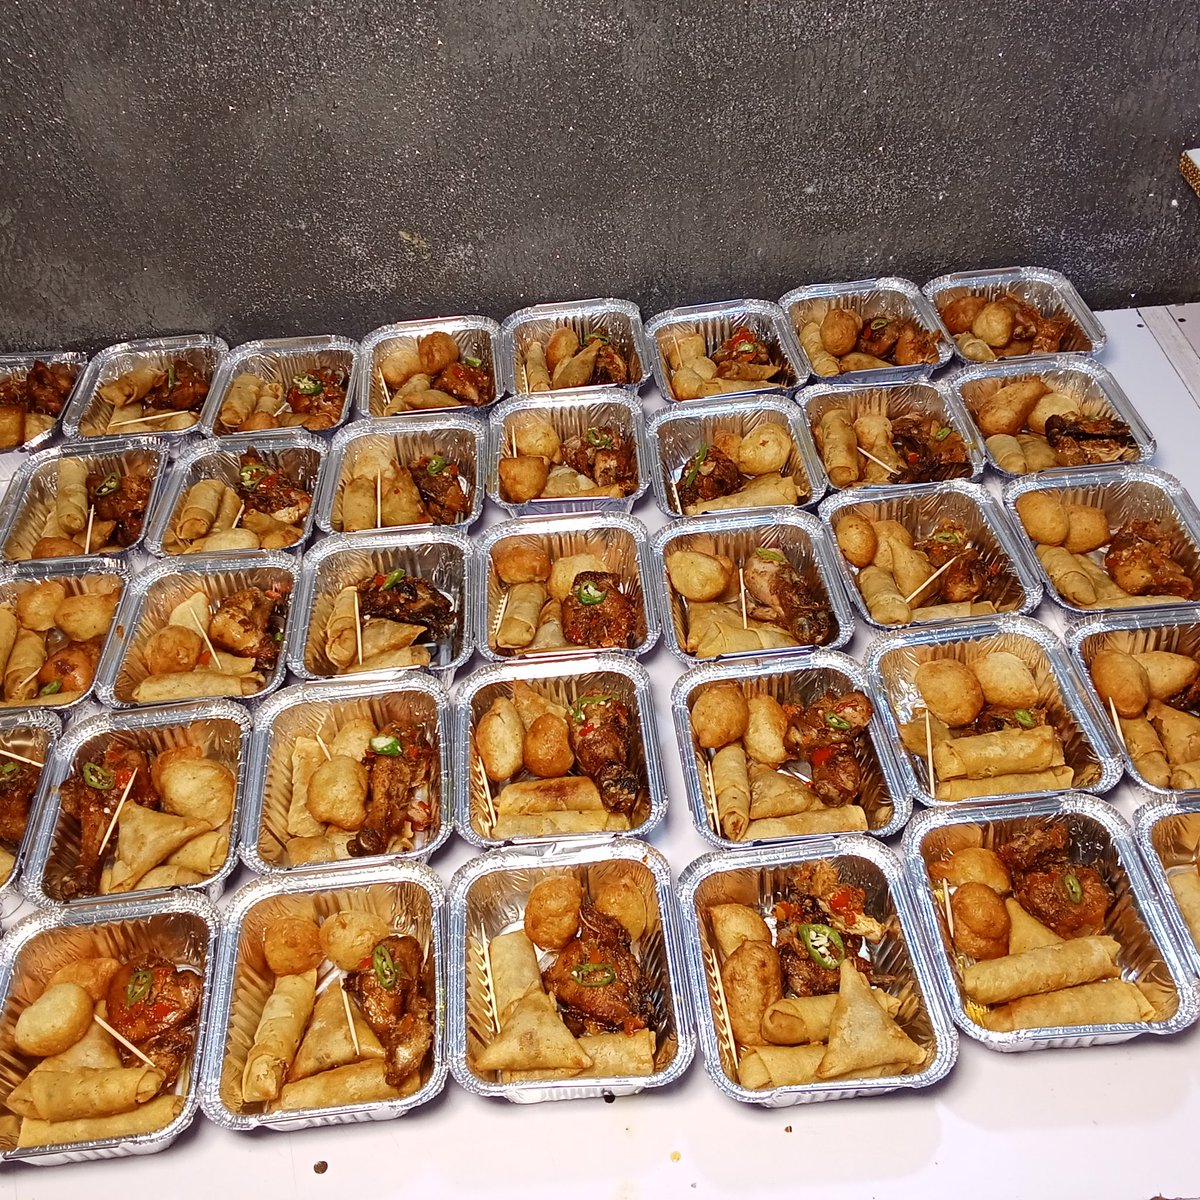 Buy small chops..
Wahala no dey finish.

We are located in the city of Asaba..

Click the link in my bio to place an order.

✍️Cakediva.

#pearldott #suprisesinasaba #foodtrayinasaba #smallchopsinasaba #asababaker #cakesinasaba #foodtrays #eventplanning #eventdecor